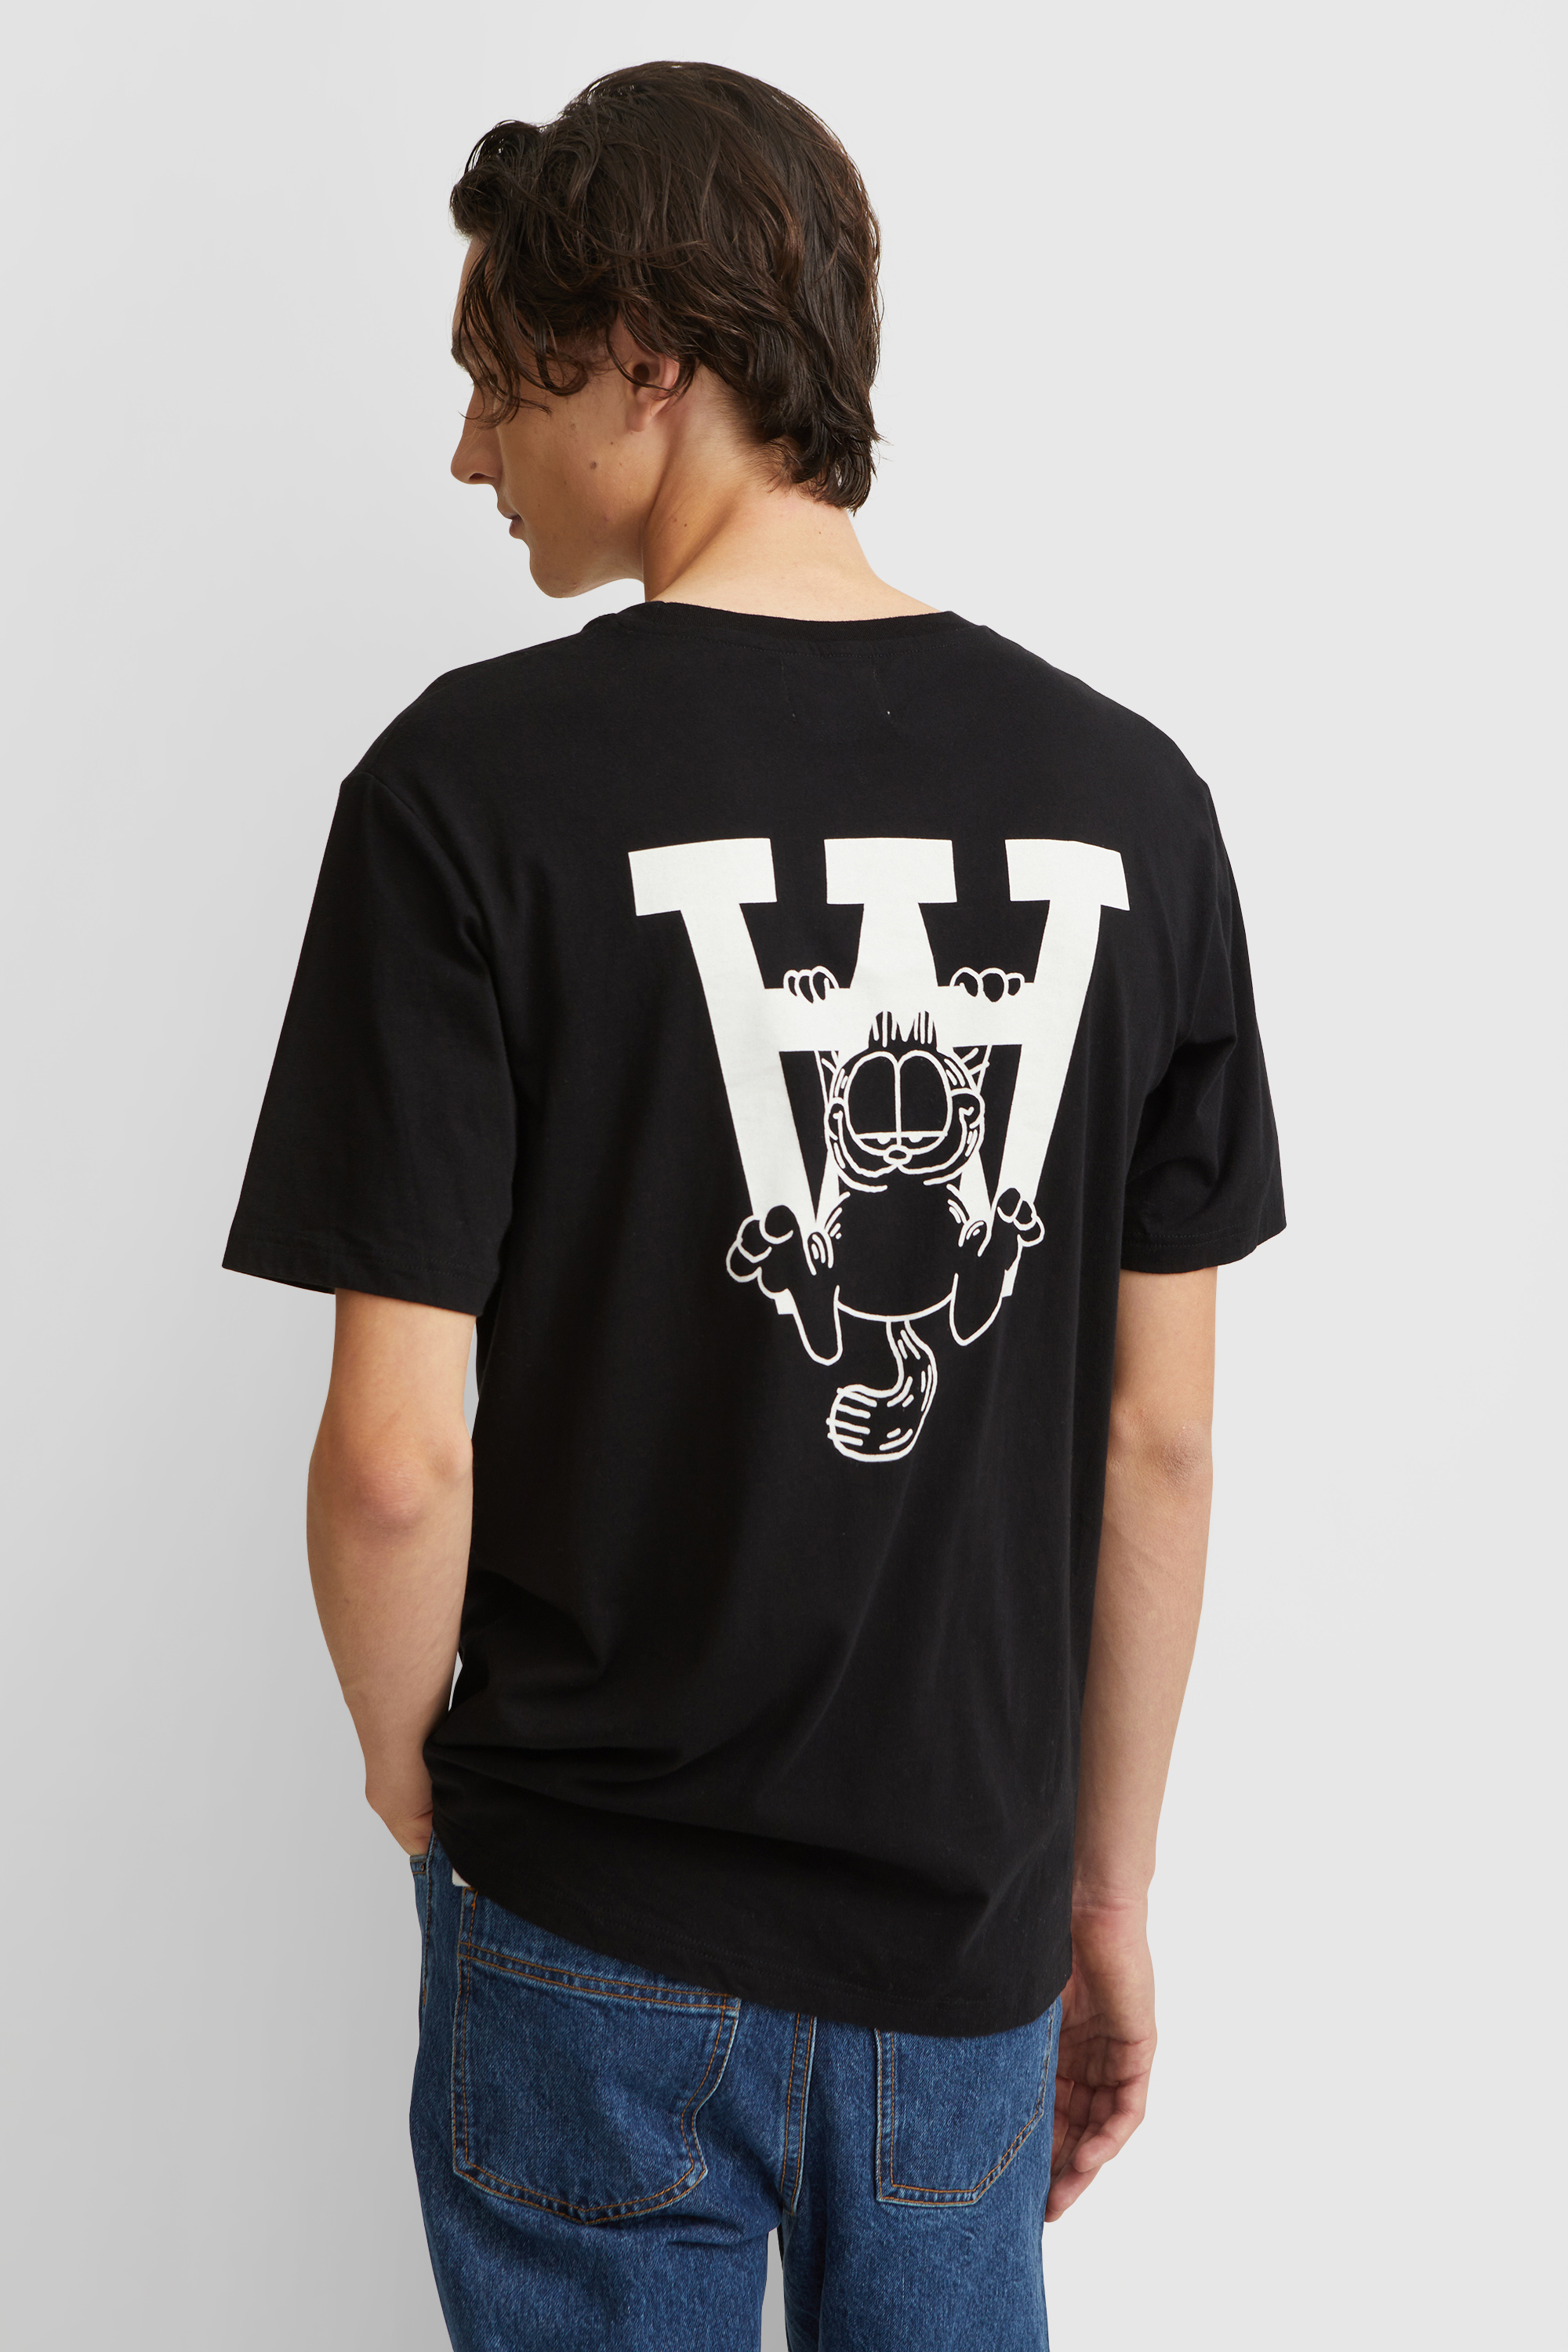 Garfield by Wood Wood Ace T-shirt Hanging Black | WoodWood.com